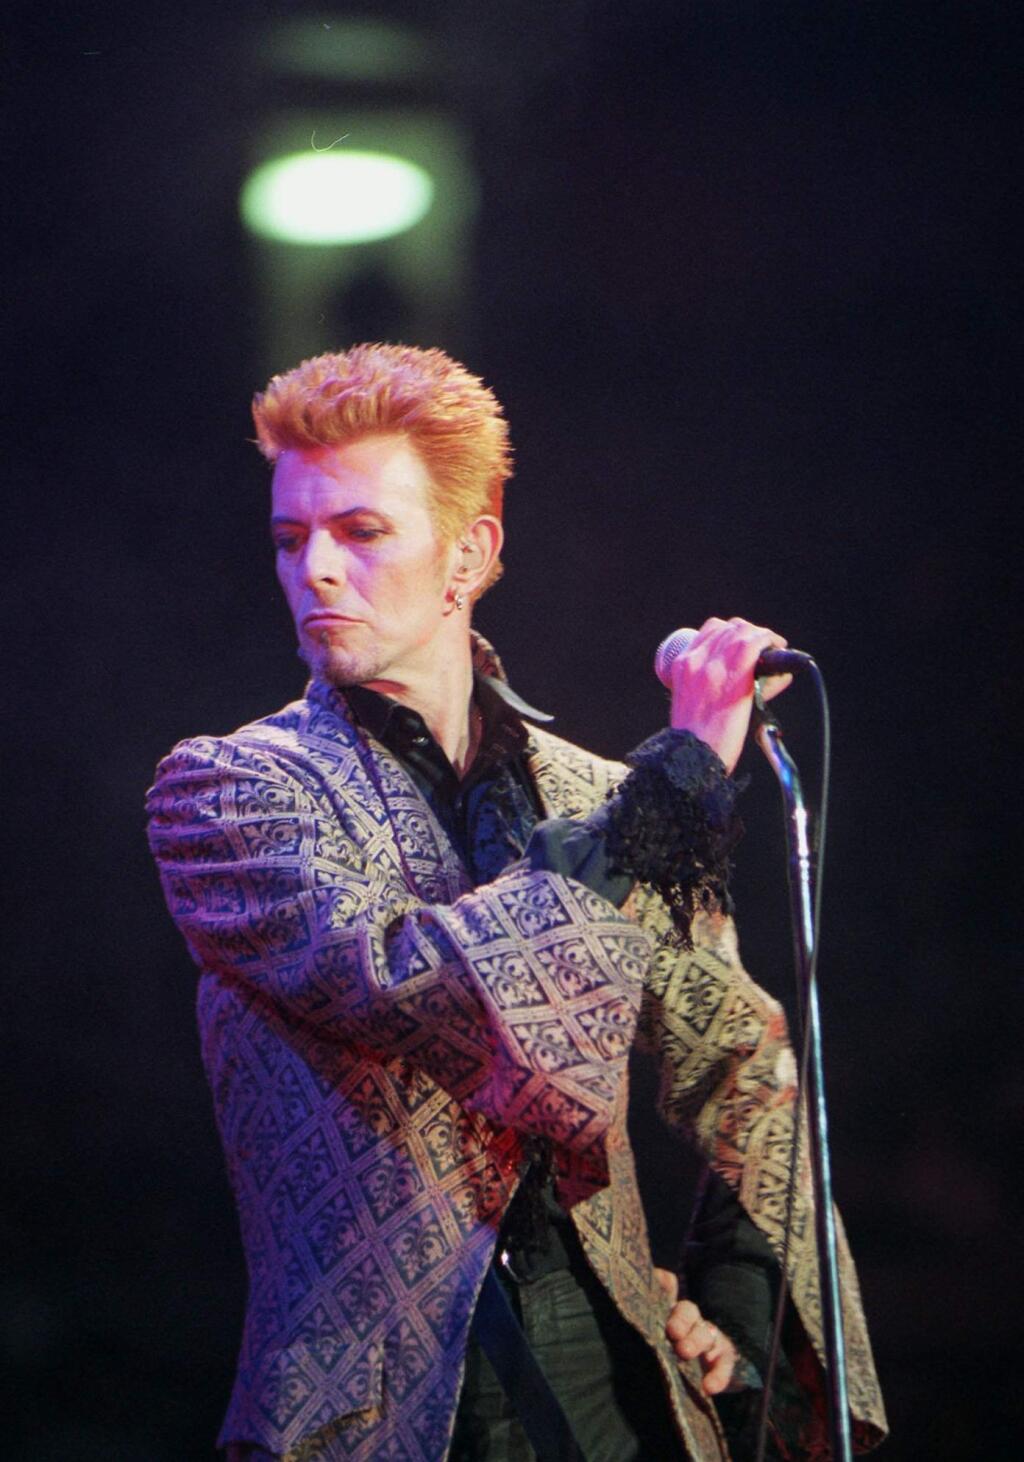 FILE - In this Jan. 9, 1997, file photo, David Bowie performs during a concert celebrating his 50th birthday, at Madison Square Garden in New York. Bowie, the innovative and iconic singer whose illustrious career lasted five decades, died Monday, Jan. 11, 2016, after battling cancer for 18 months. He was 69. (AP Photo/Ron Frehm, File)